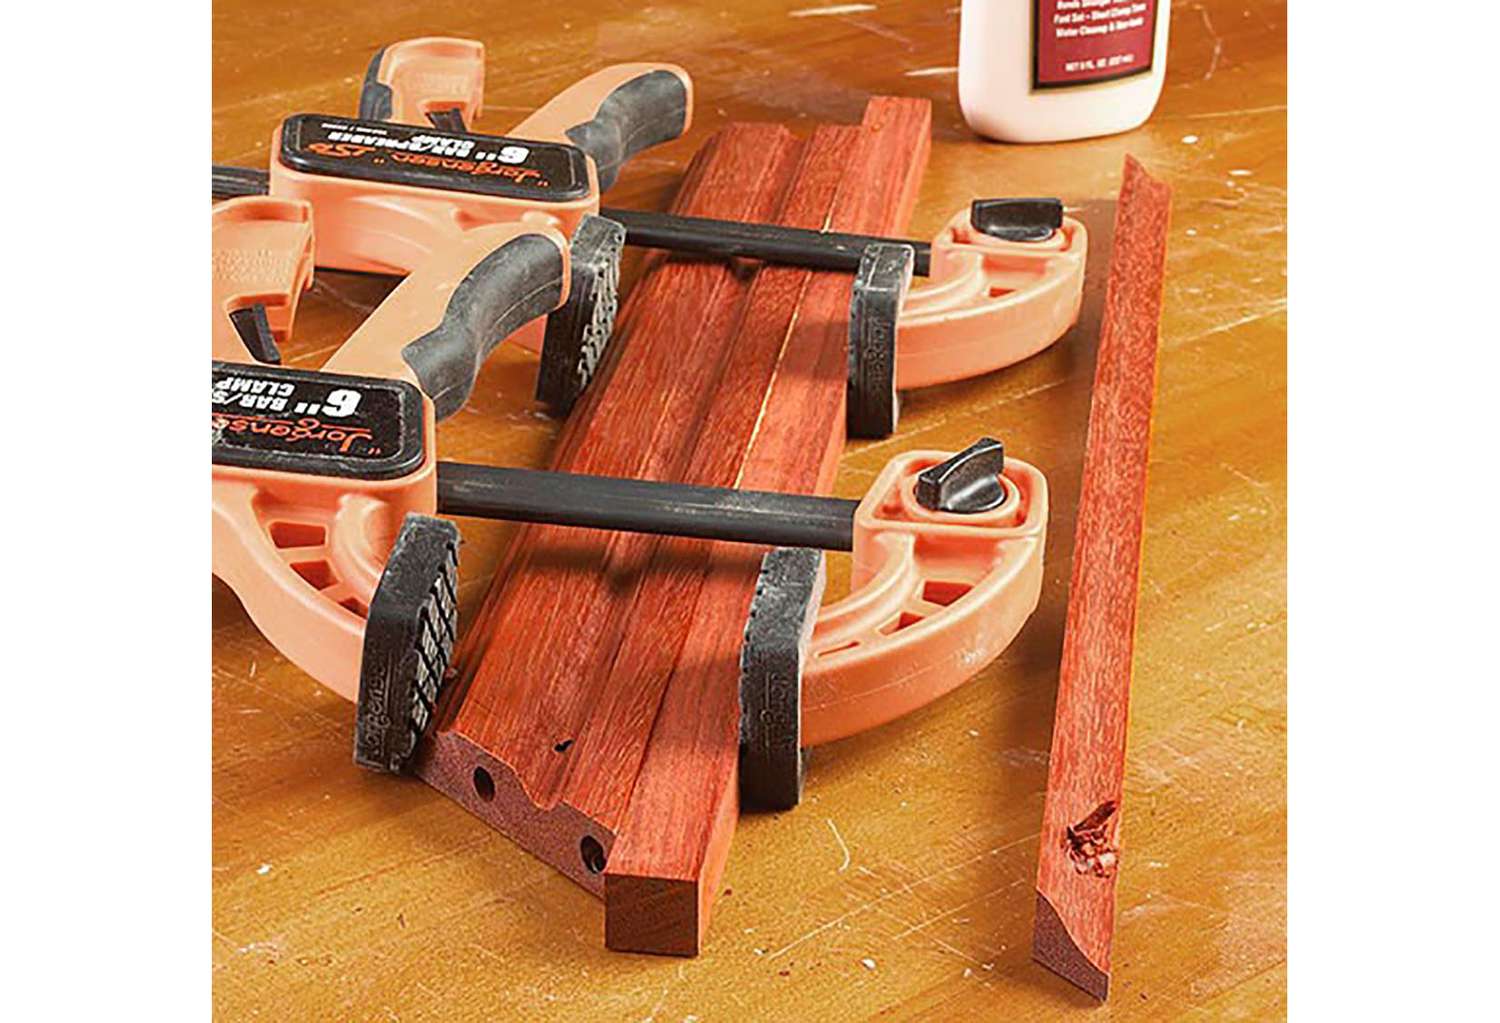 Orange clamp with 3 boards